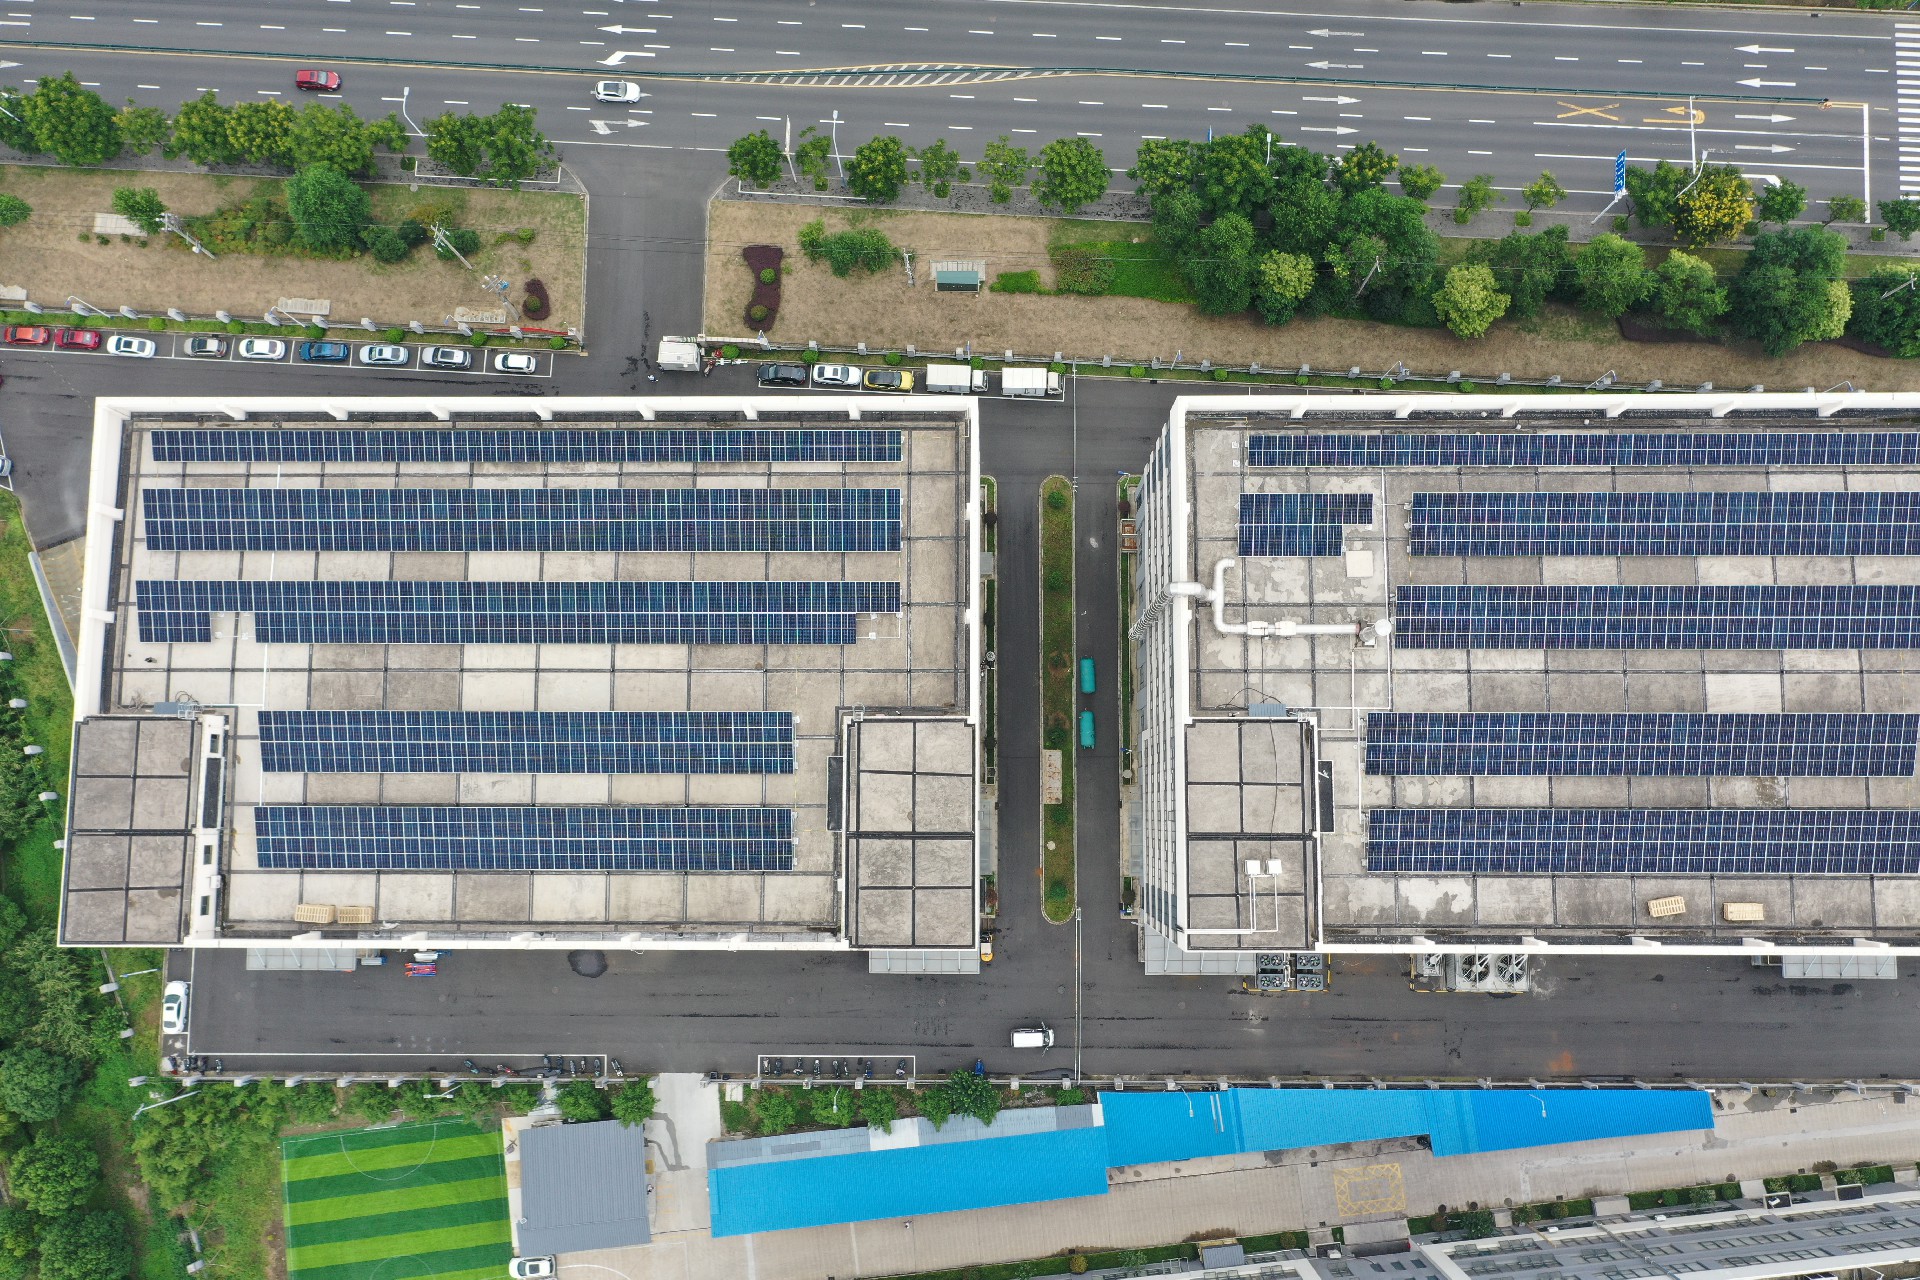 Changzhou Honghui Accelerator Industrial Park 421.3kWp distributed photovoltaic project connected to the grid